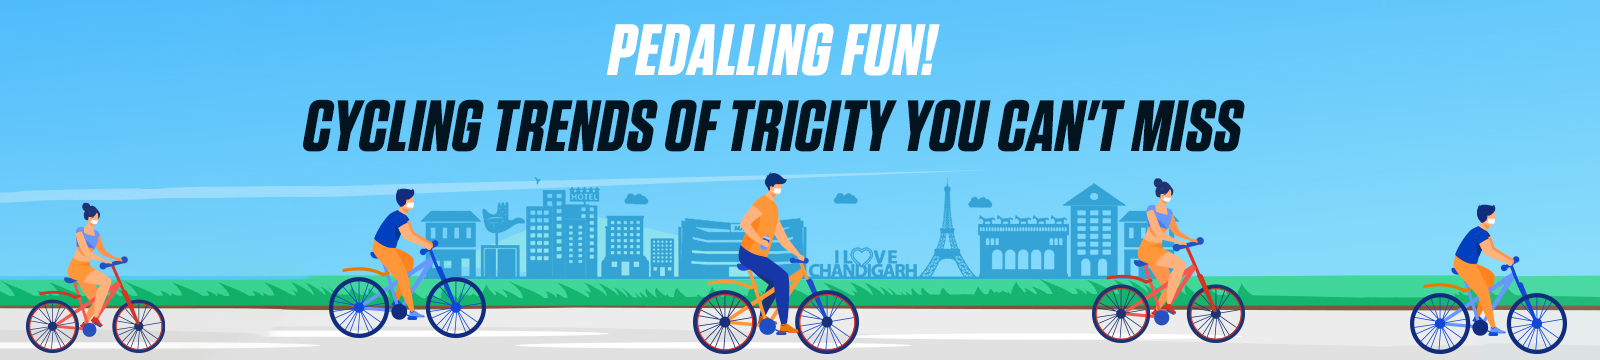 Pedalling Fun! Cycling Trends of Tricity You Can’t Miss